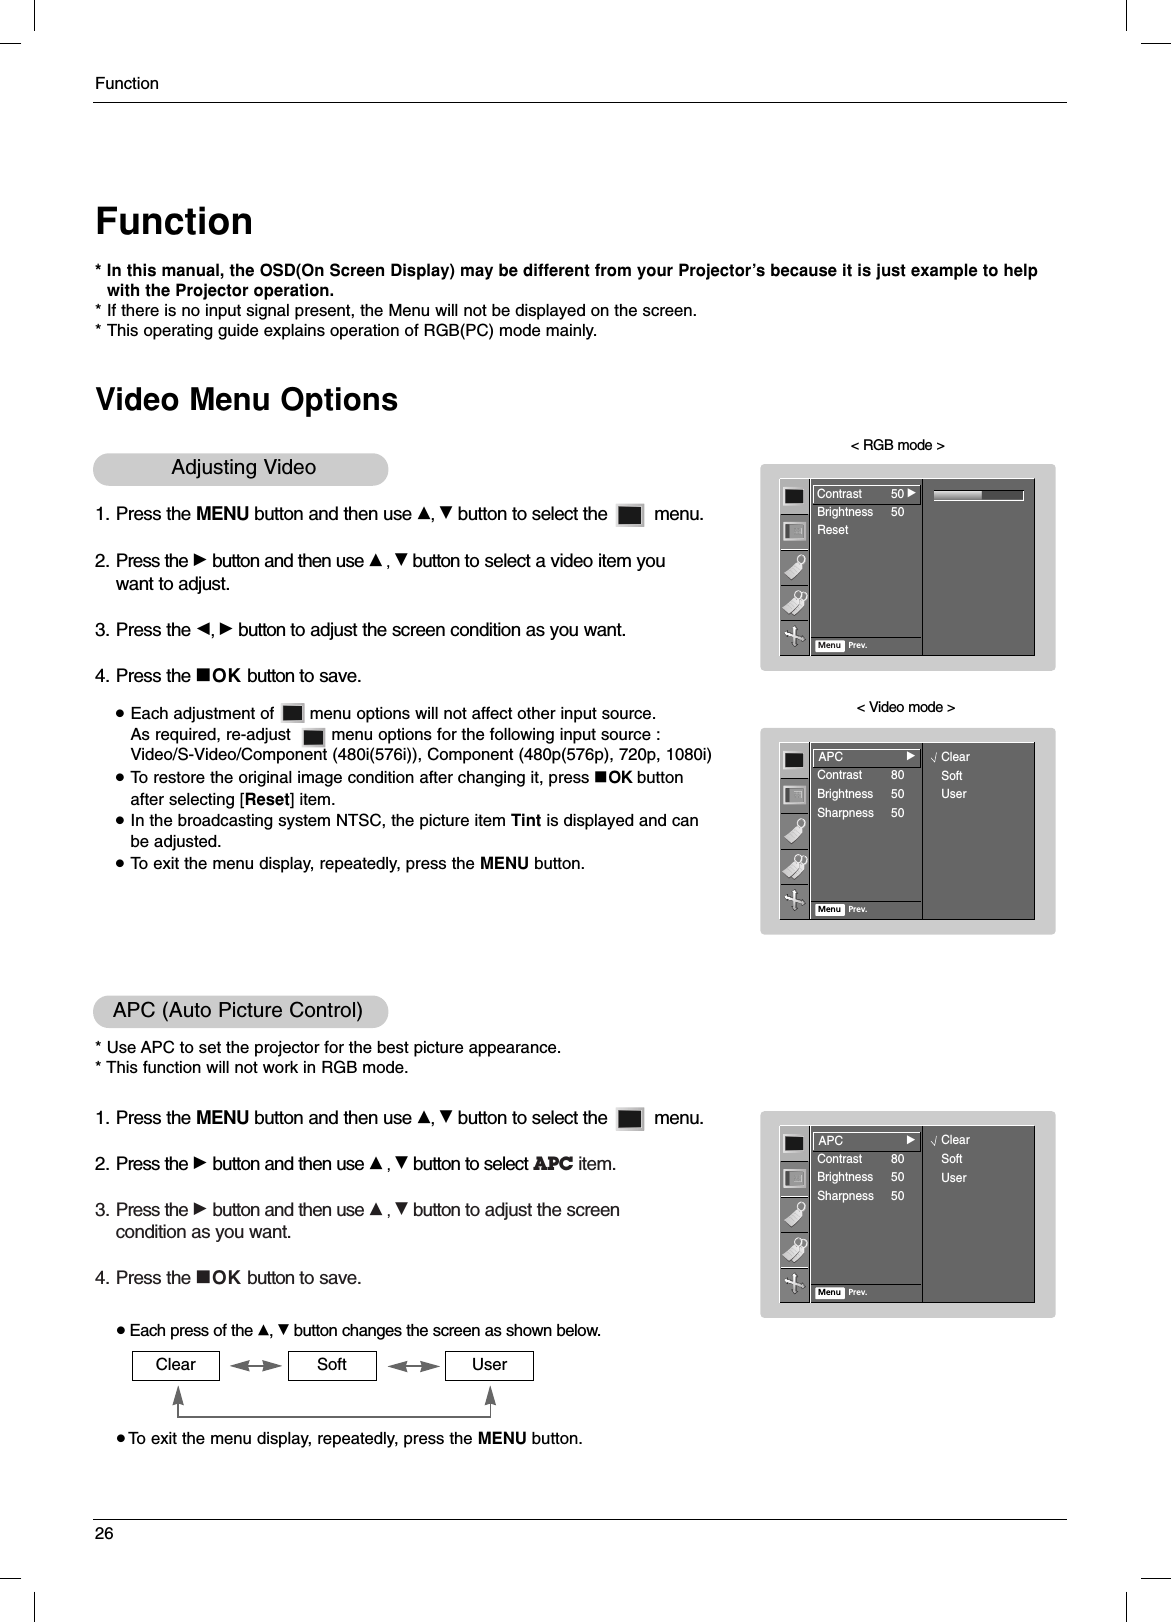 Function26FunctionVideo Menu Options* In this manual, the OSD(On Screen Display) may be different from your Projector’s because it is just example to help with the Projector operation.* If there is no input signal present, the Menu will not be displayed on the screen.* This operating guide explains operation of RGB(PC) mode mainly.1. Press the MENU button and then use D, Ebutton to select the         menu.2. Press the Gbutton and then use D, Ebutton to select a video item you want to adjust.3. Press the F, Gbutton to adjust the screen condition as you want.4. Press the AOK button to save.&lt; RGB mode &gt;&lt; Video mode &gt;●Each adjustment of       menu options will not affect other input source. As required, re-adjust        menu options for the following input source : Video/S-Video/Component (480i(576i)), Component (480p(576p), 720p, 1080i)●To restore the original image condition after changing it, press AOK button after selecting [Reset] item.●In the broadcasting system NTSC, the picture item Tint is displayed and can be adjusted.●To exit the menu display, repeatedly, press the MENU button.Adjusting Video 1. Press the MENU button and then use D, Ebutton to select the         menu.2. Press the Gbutton and then use D, Ebutton to select APC item.3. Press the Gbutton and then use D, Ebutton to adjust the screencondition as you want.4. Press the AOK button to save.APC (Auto Picture Control)* Use APC to set the projector for the best picture appearance.* This function will not work in RGB mode.●Each press of the D, Ebutton changes the screen as shown below.● To exit the menu display, repeatedly, press the MENU button.Clear Soft UserContrast 50Brightness 50ResetMenu Prev.Contrast 50GAPCContrast 80Brightness 50Sharpness 50Menu Prev.APCGClearSoftUserAPCContrast 80Brightness 50Sharpness 50Menu Prev.APCGClearSoftUser